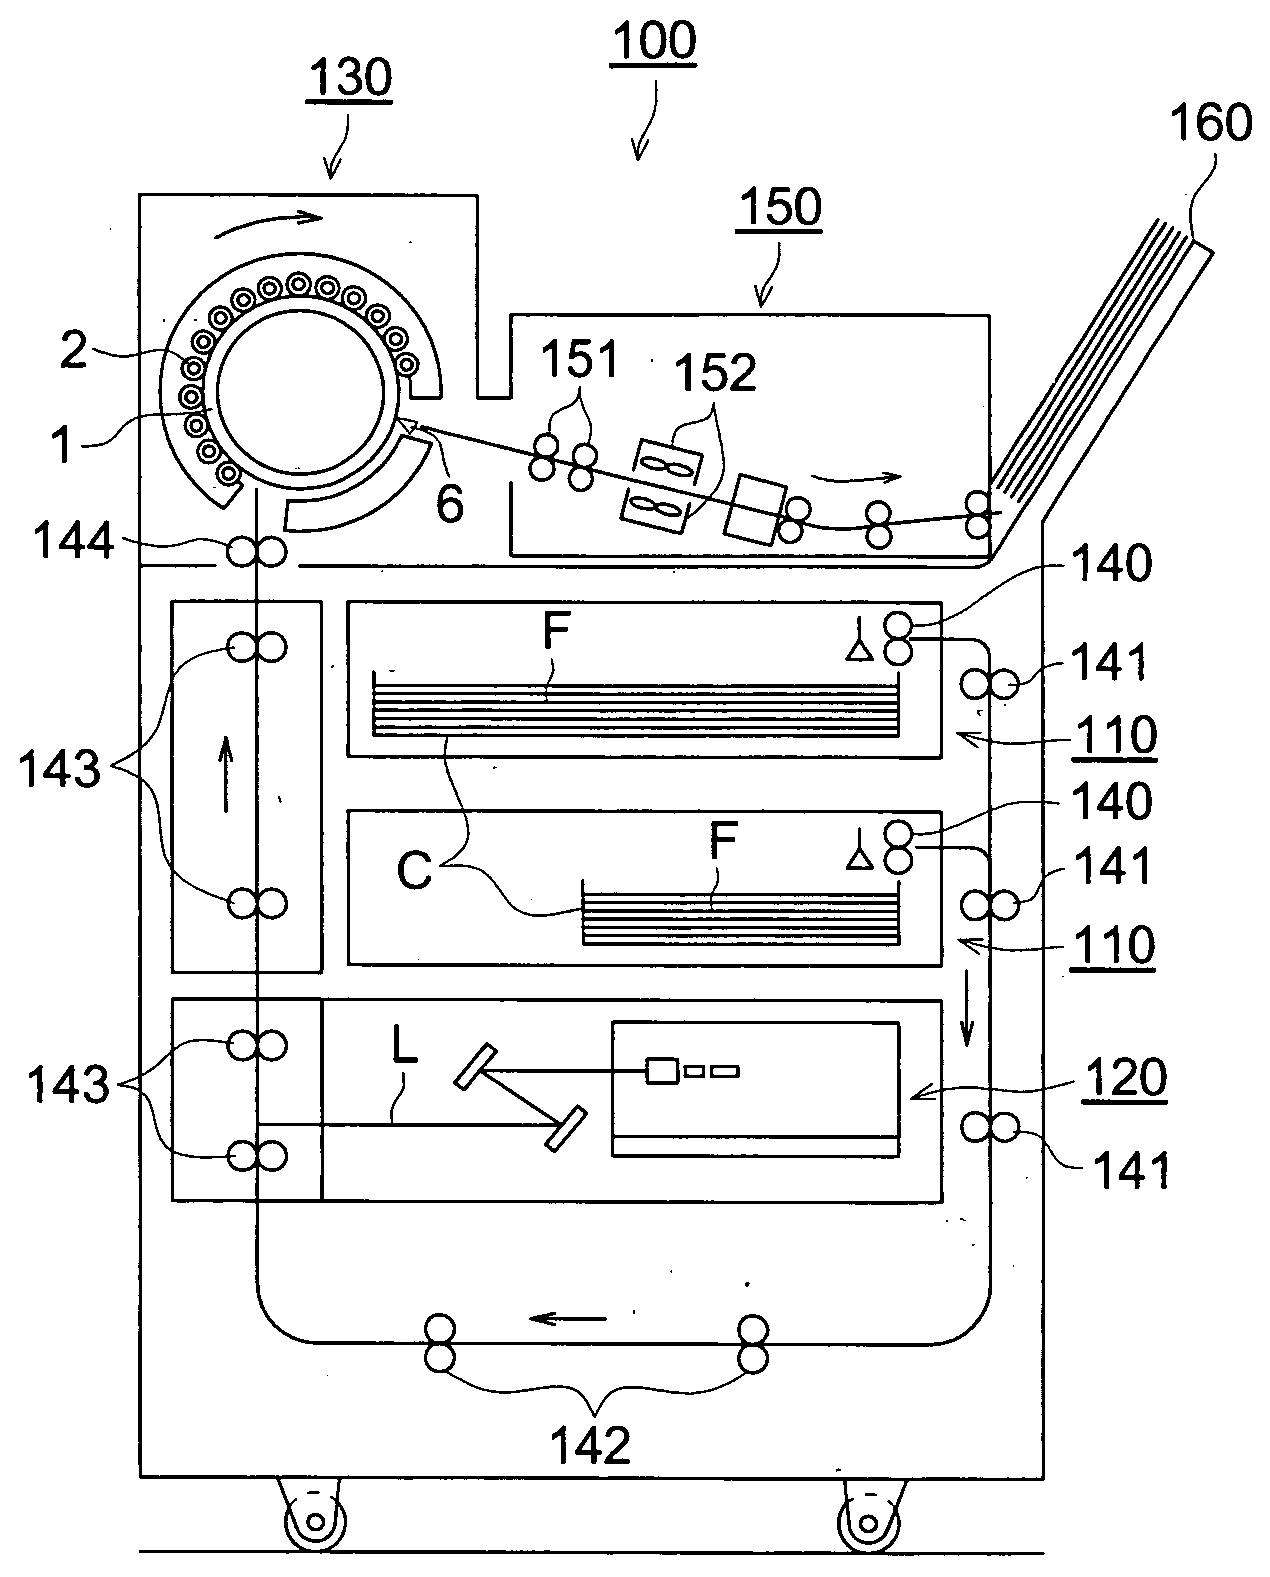 Silver salt photothermographic dry imaging material and production method of the same